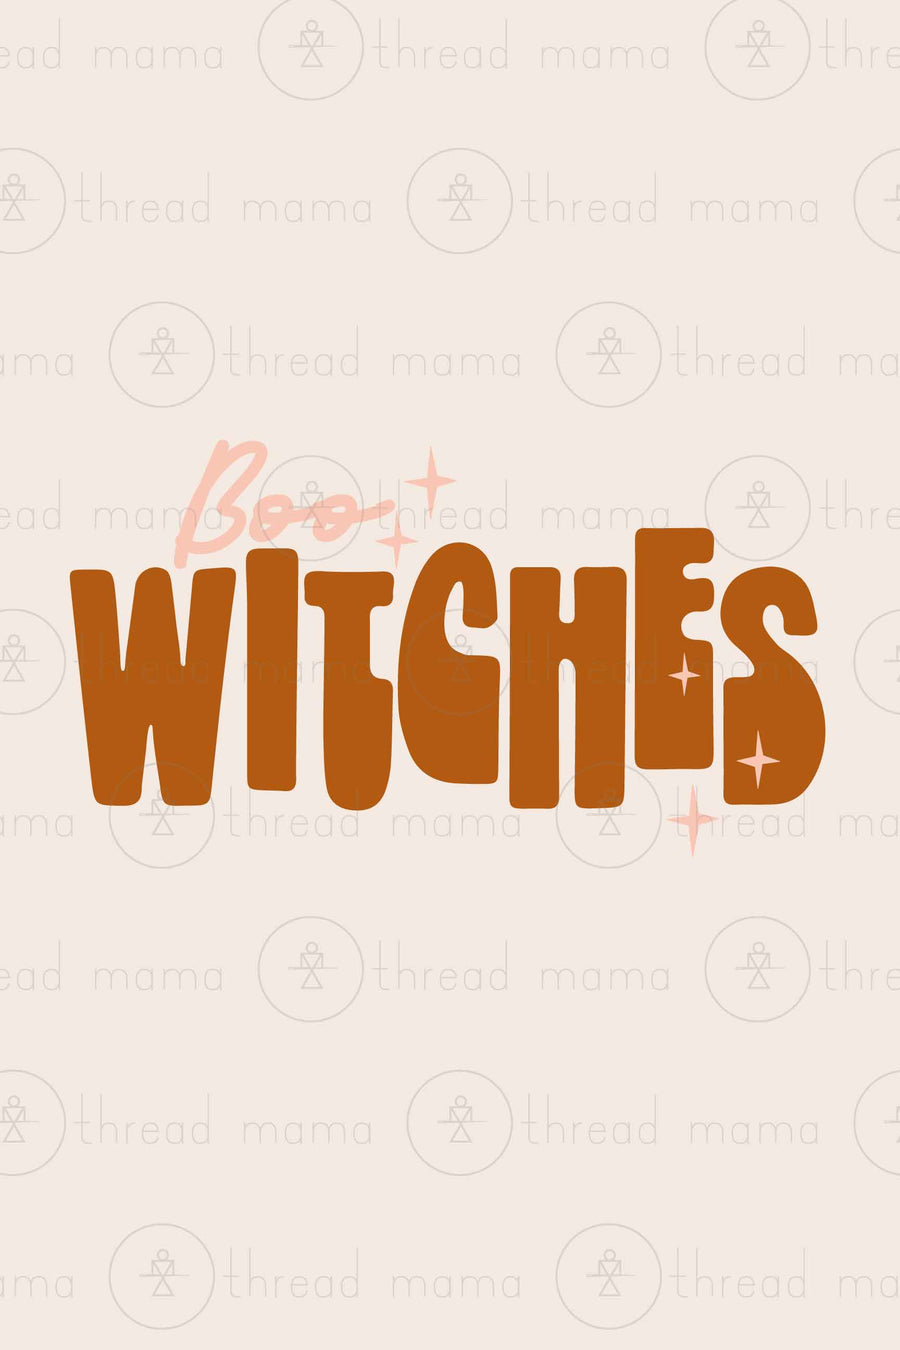 Boo Witches (2 options)